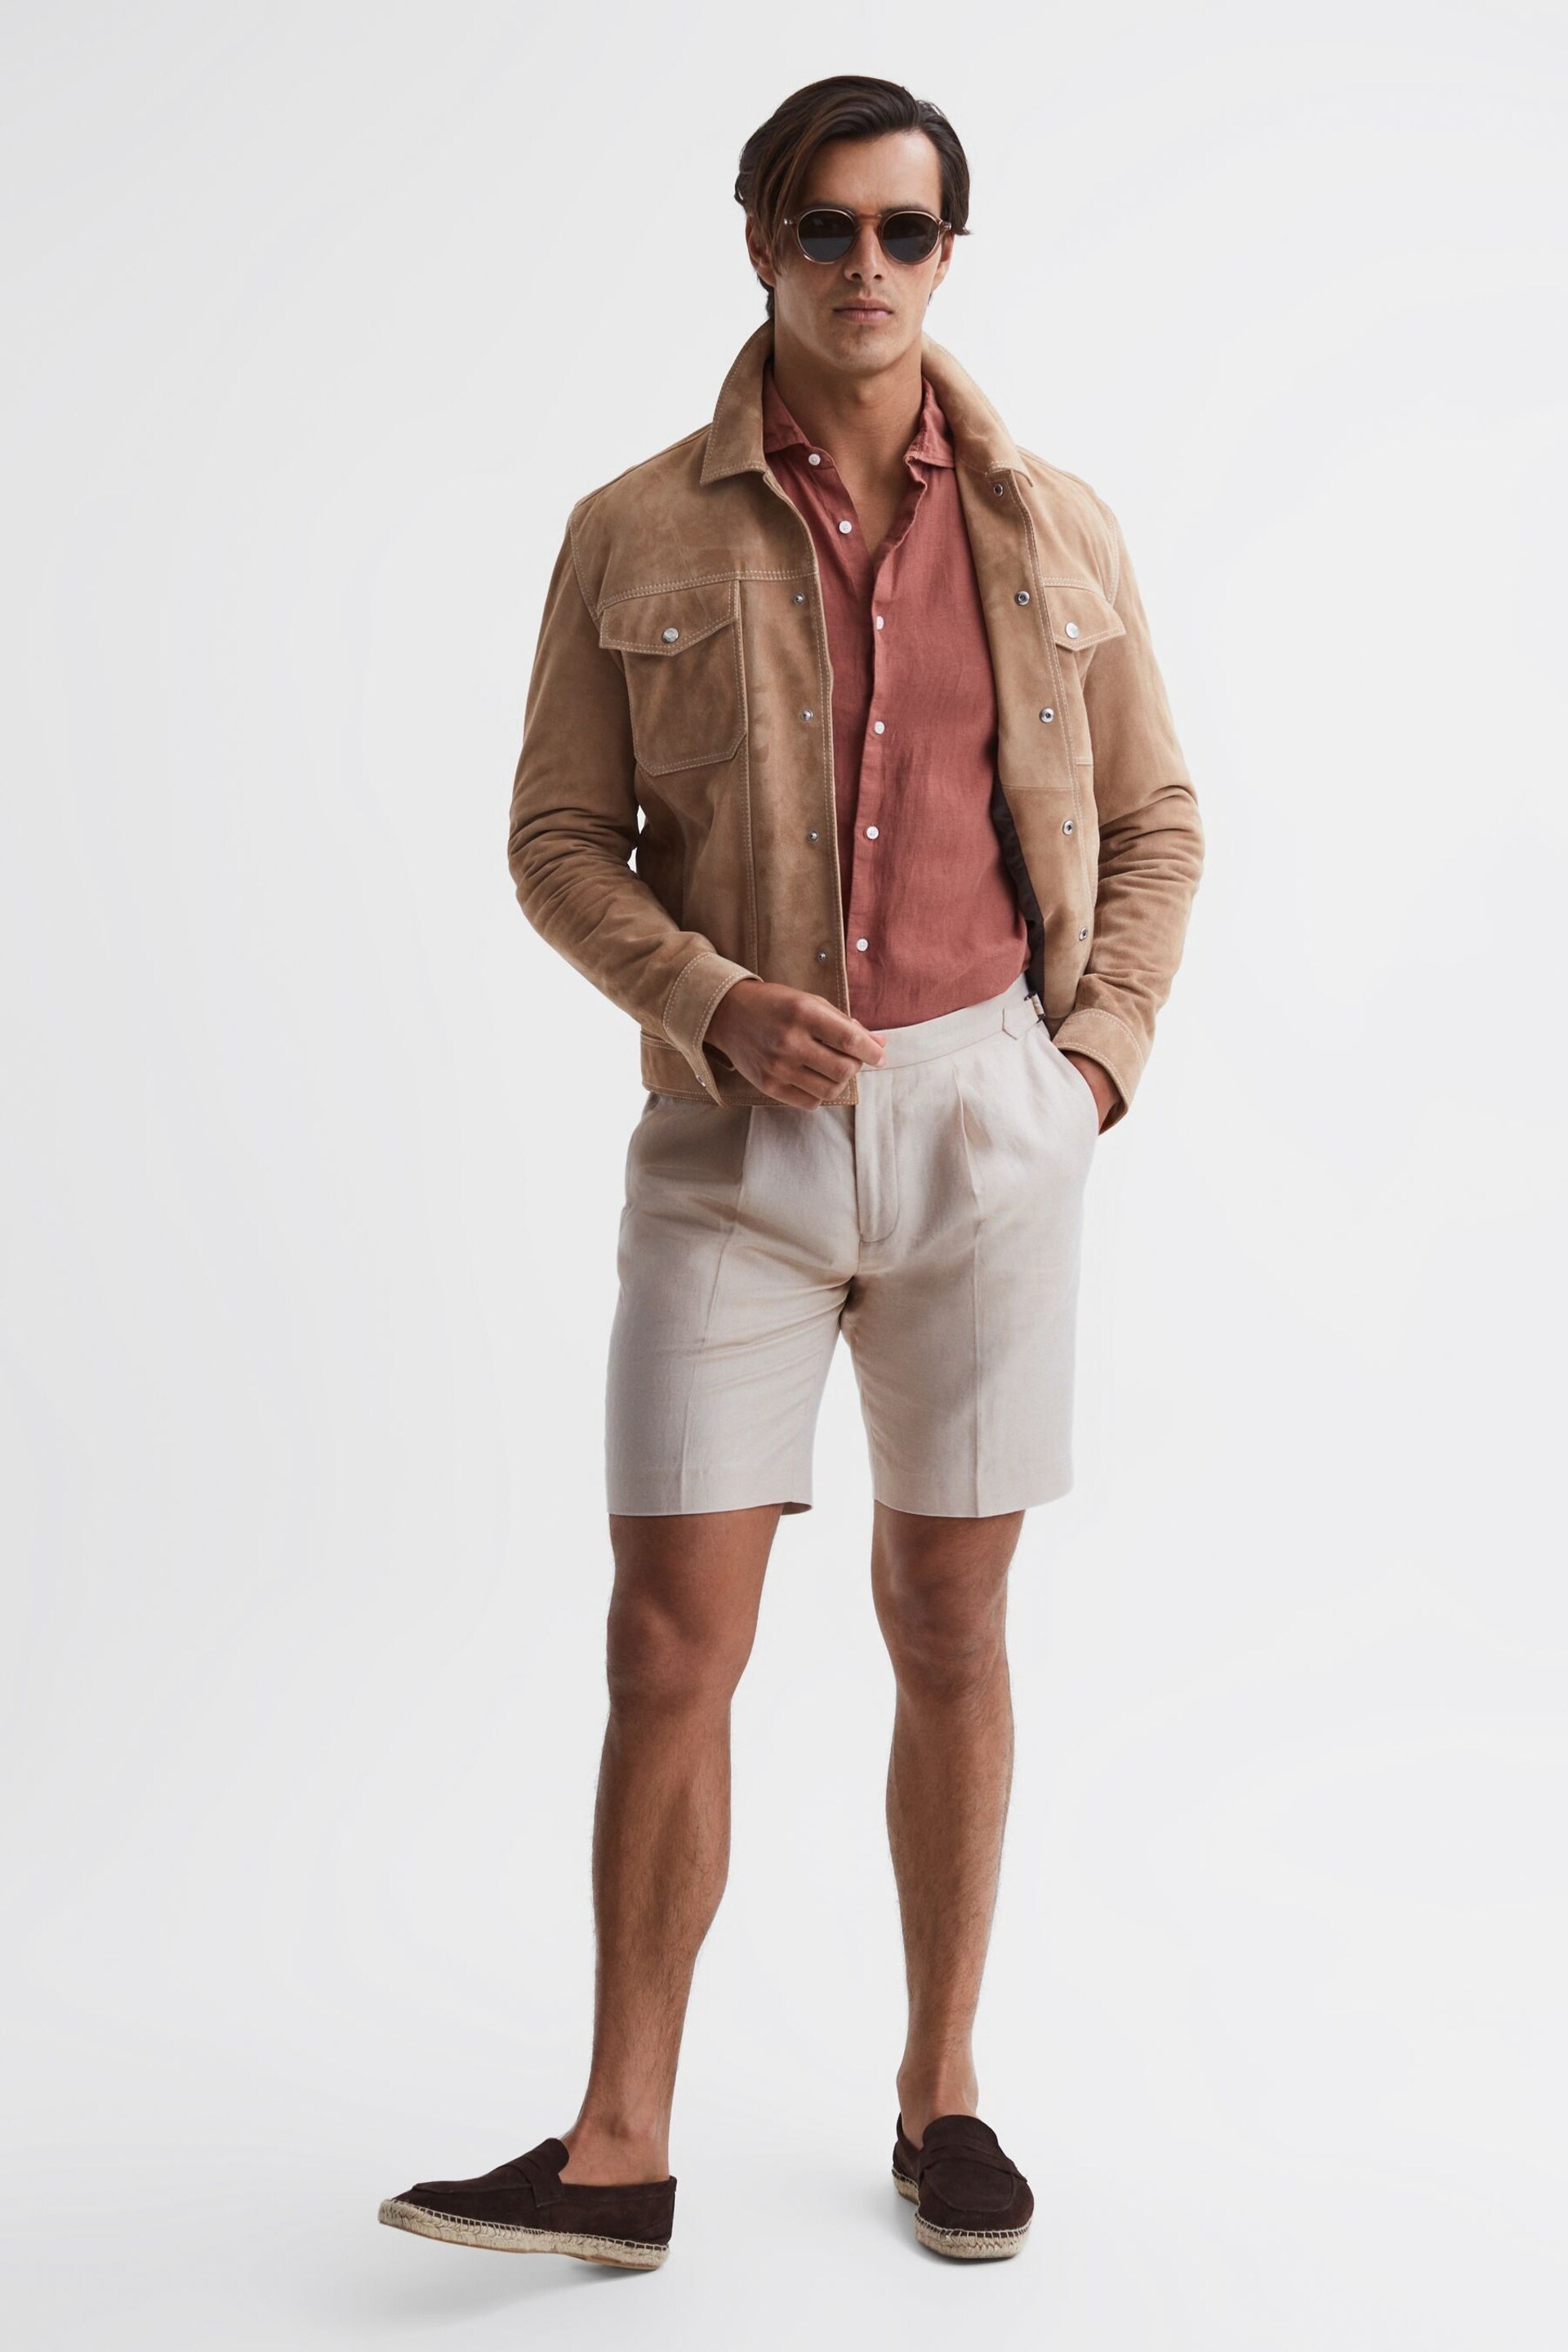 Reiss Stone Path Cotton-Linen Blend Chino Shorts - Image 3 of 6